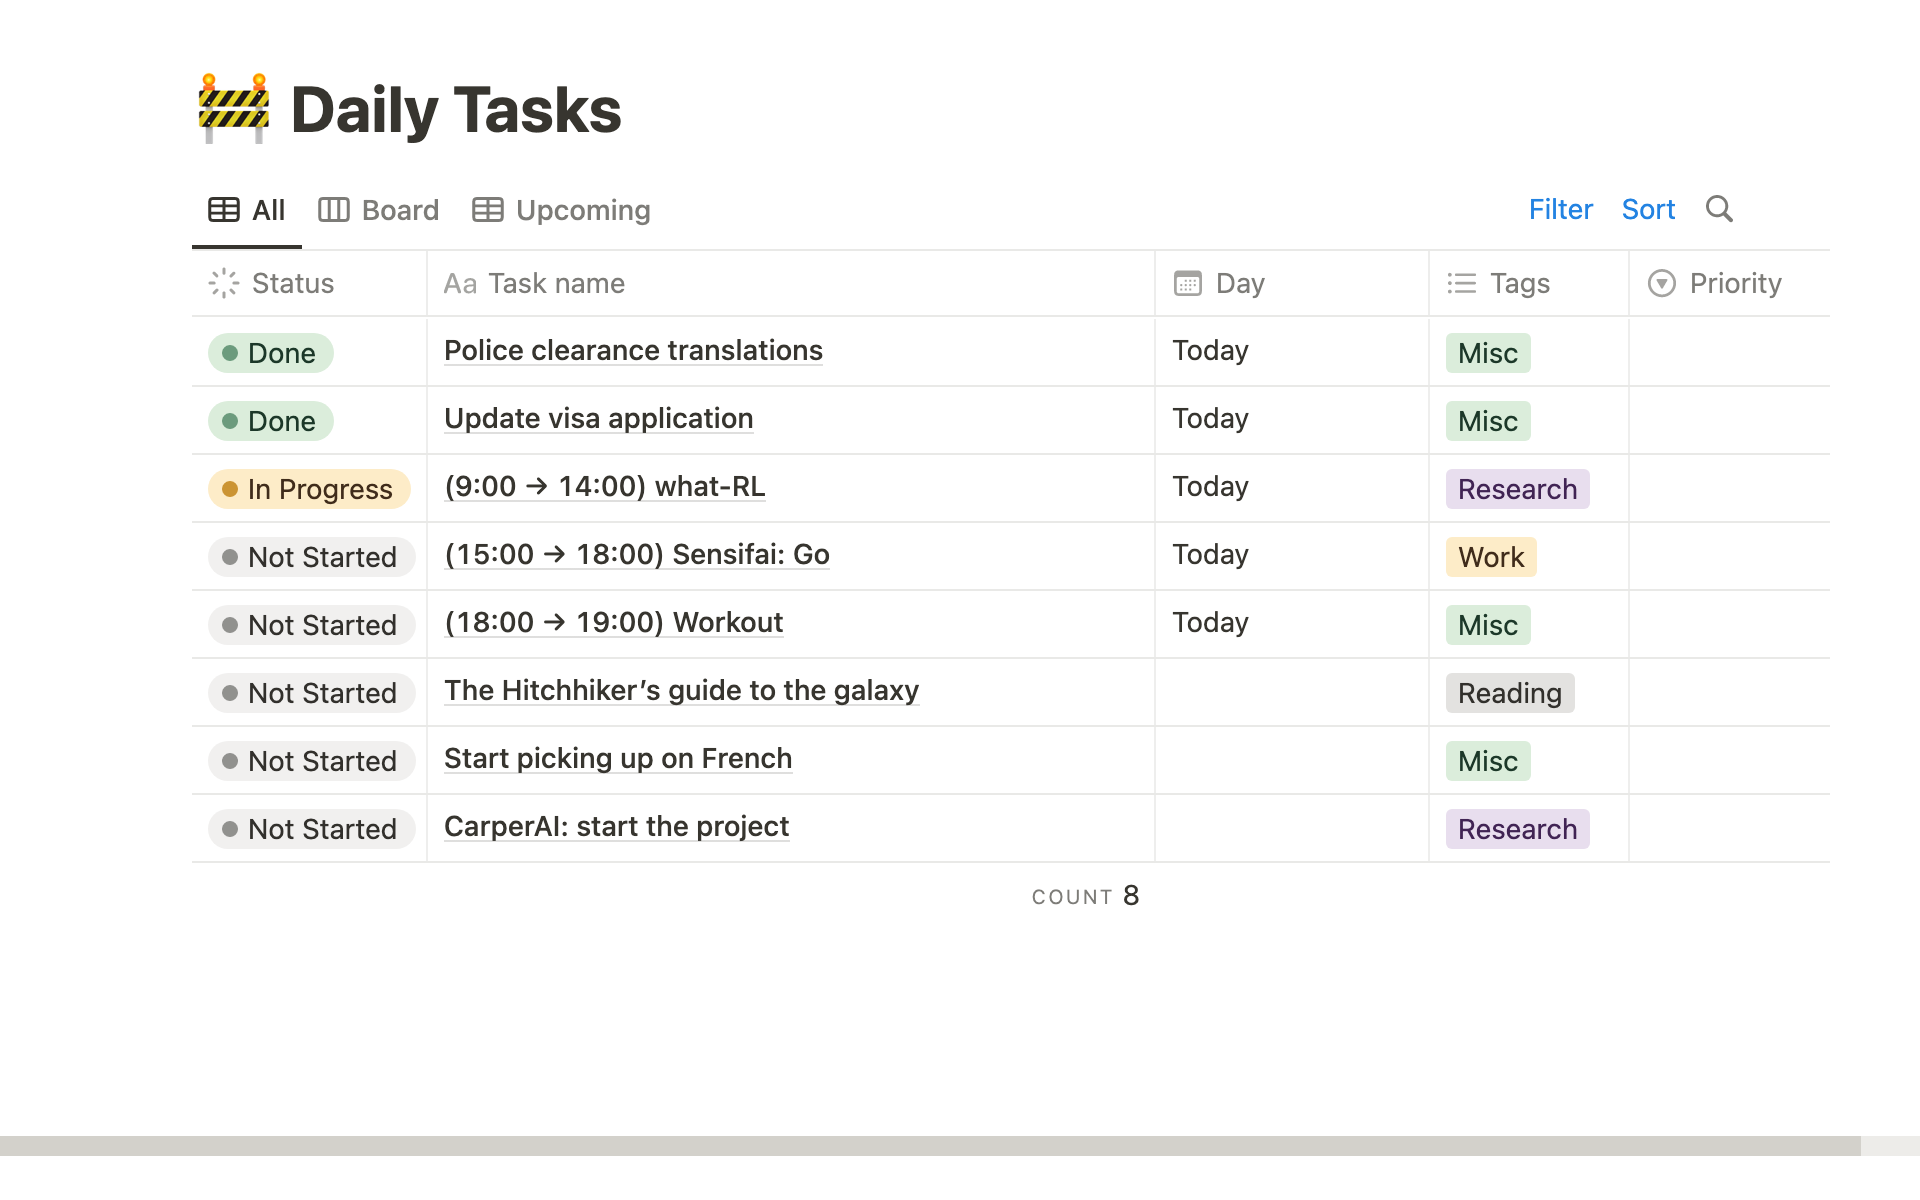 Makes it easier to follow daily tasks, keeping track of them, and schedule the day.